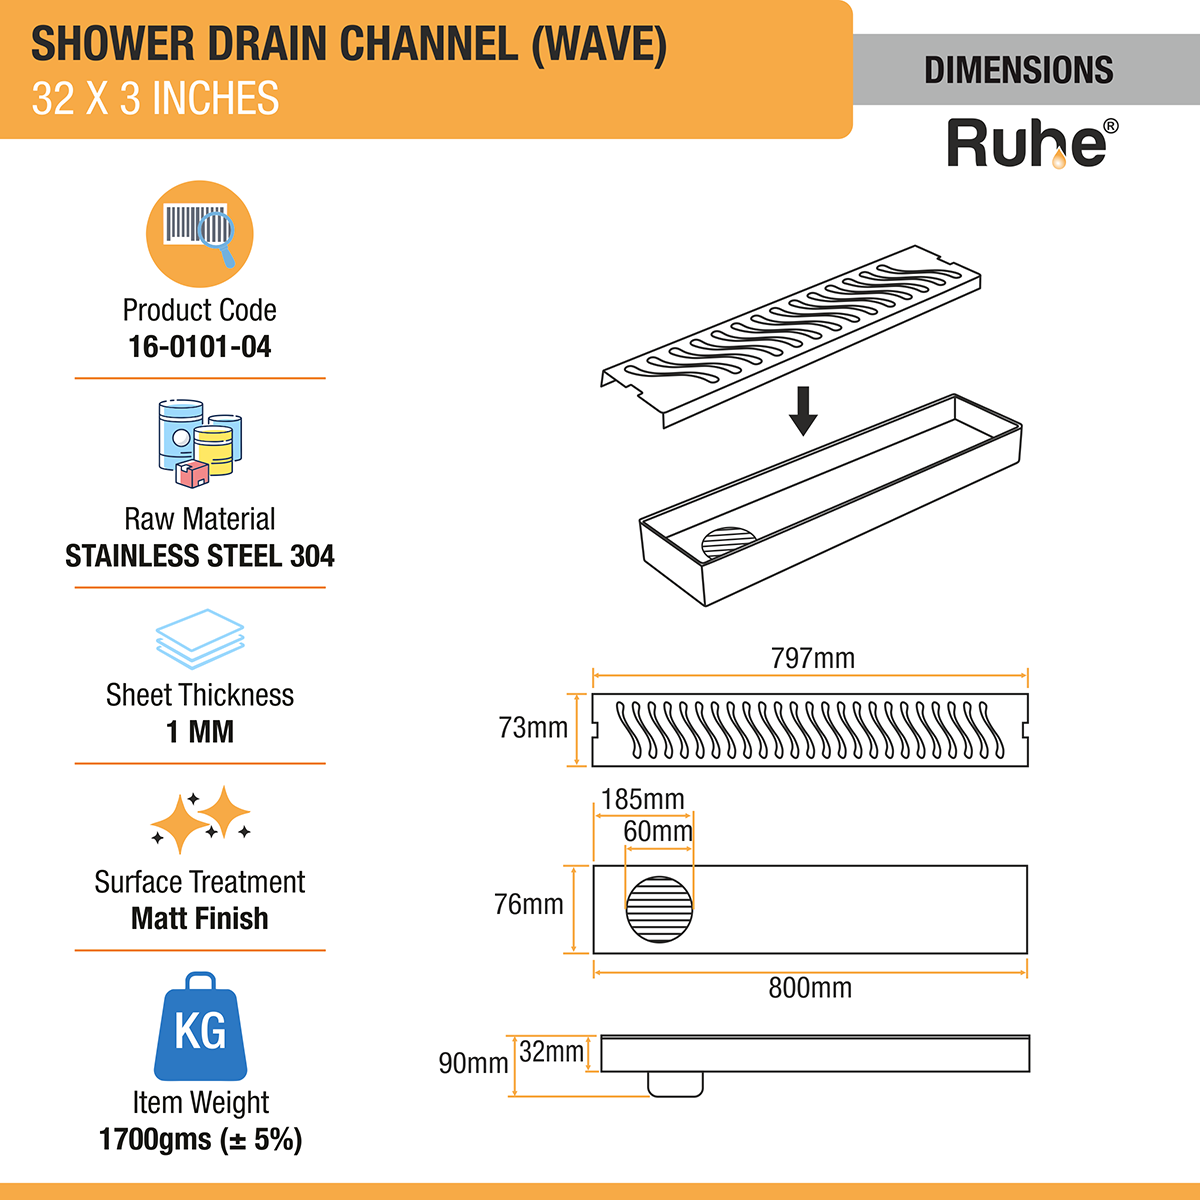 Wave Shower Drain Channel (32 X 3 Inches) with Cockroach Trap (304 Grade) dimensions and size